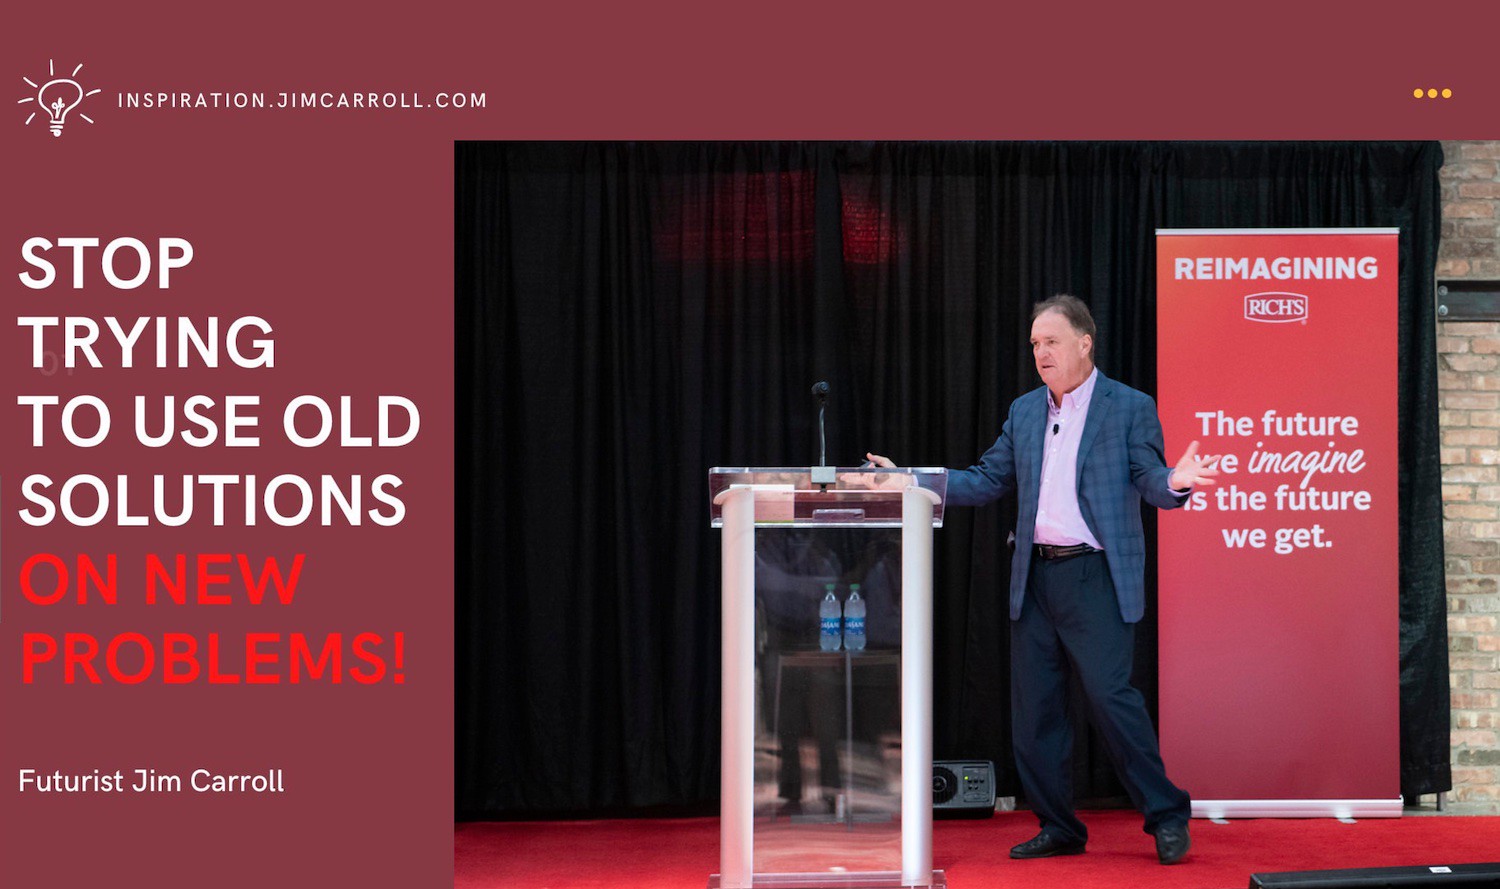 "Stop trying to use old solutions on new problems!" - Futurist Jim Carroll